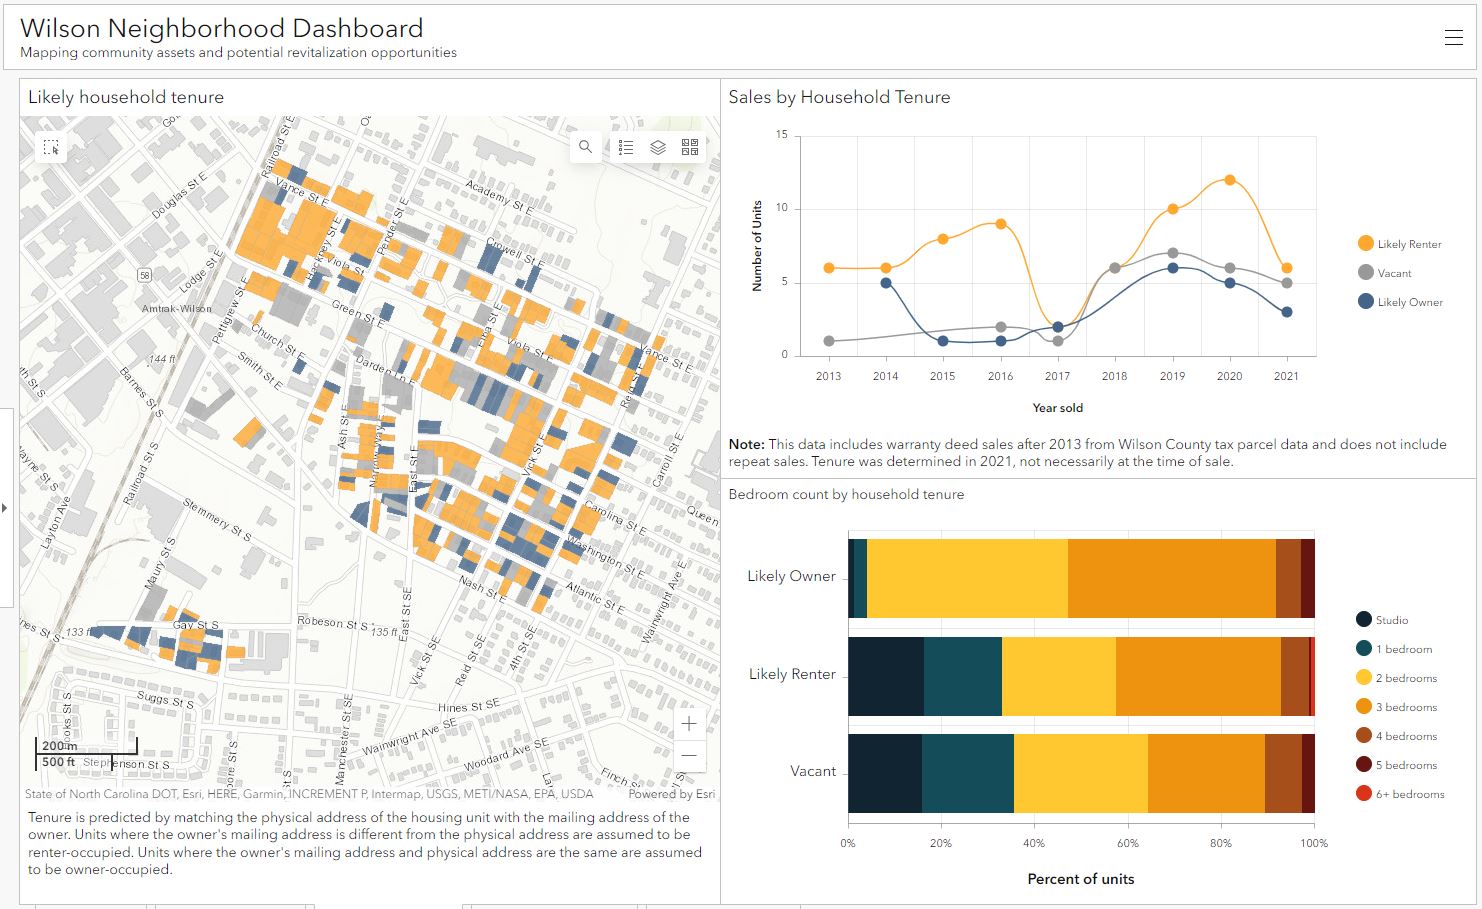 Wilson Neighborhood dashboard - a community map that includes data related to housing sales to illustrate an example of the topic being discussed at the session.